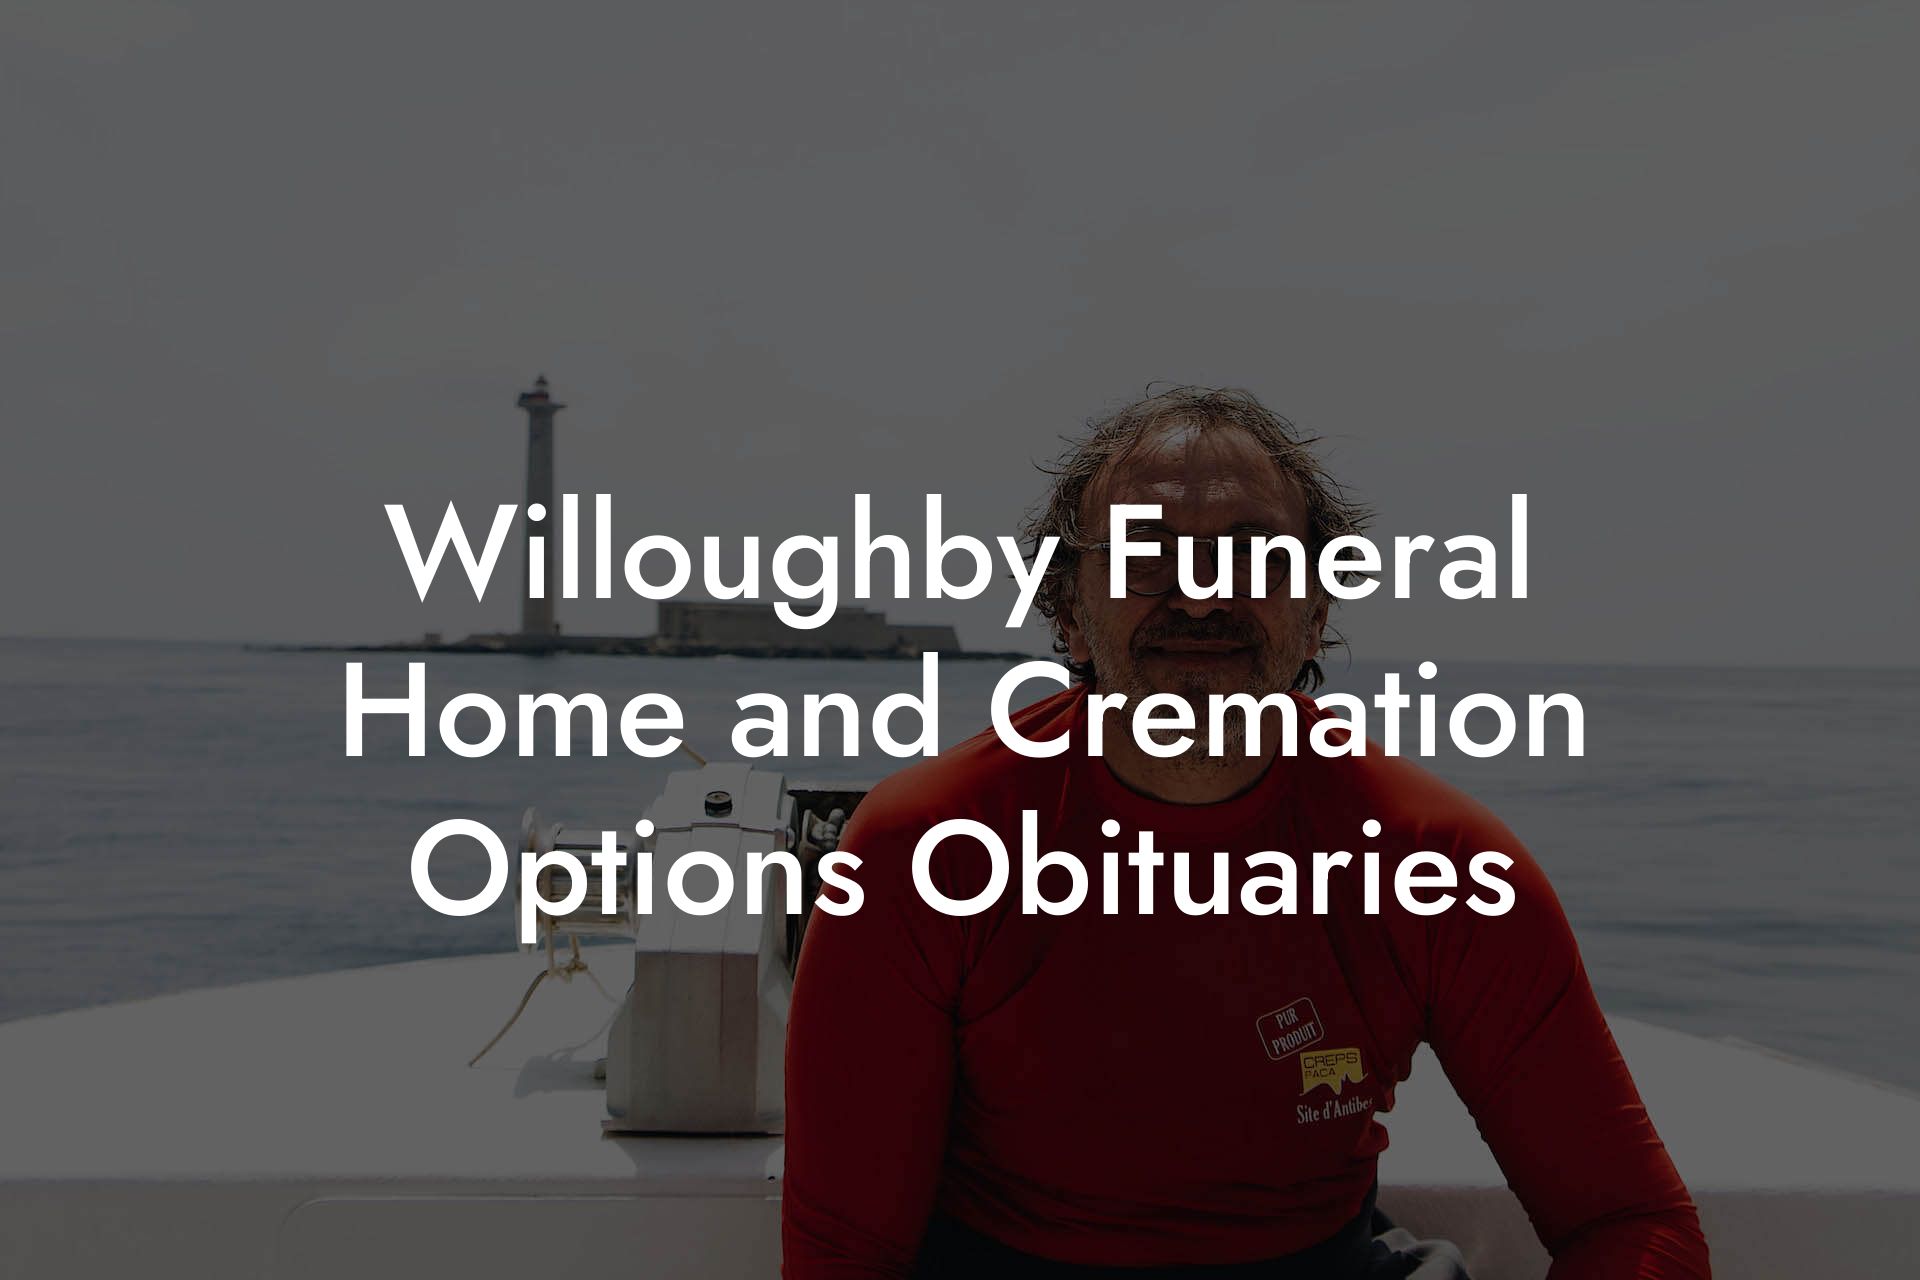 Willoughby Funeral Home and Cremation Options Obituaries